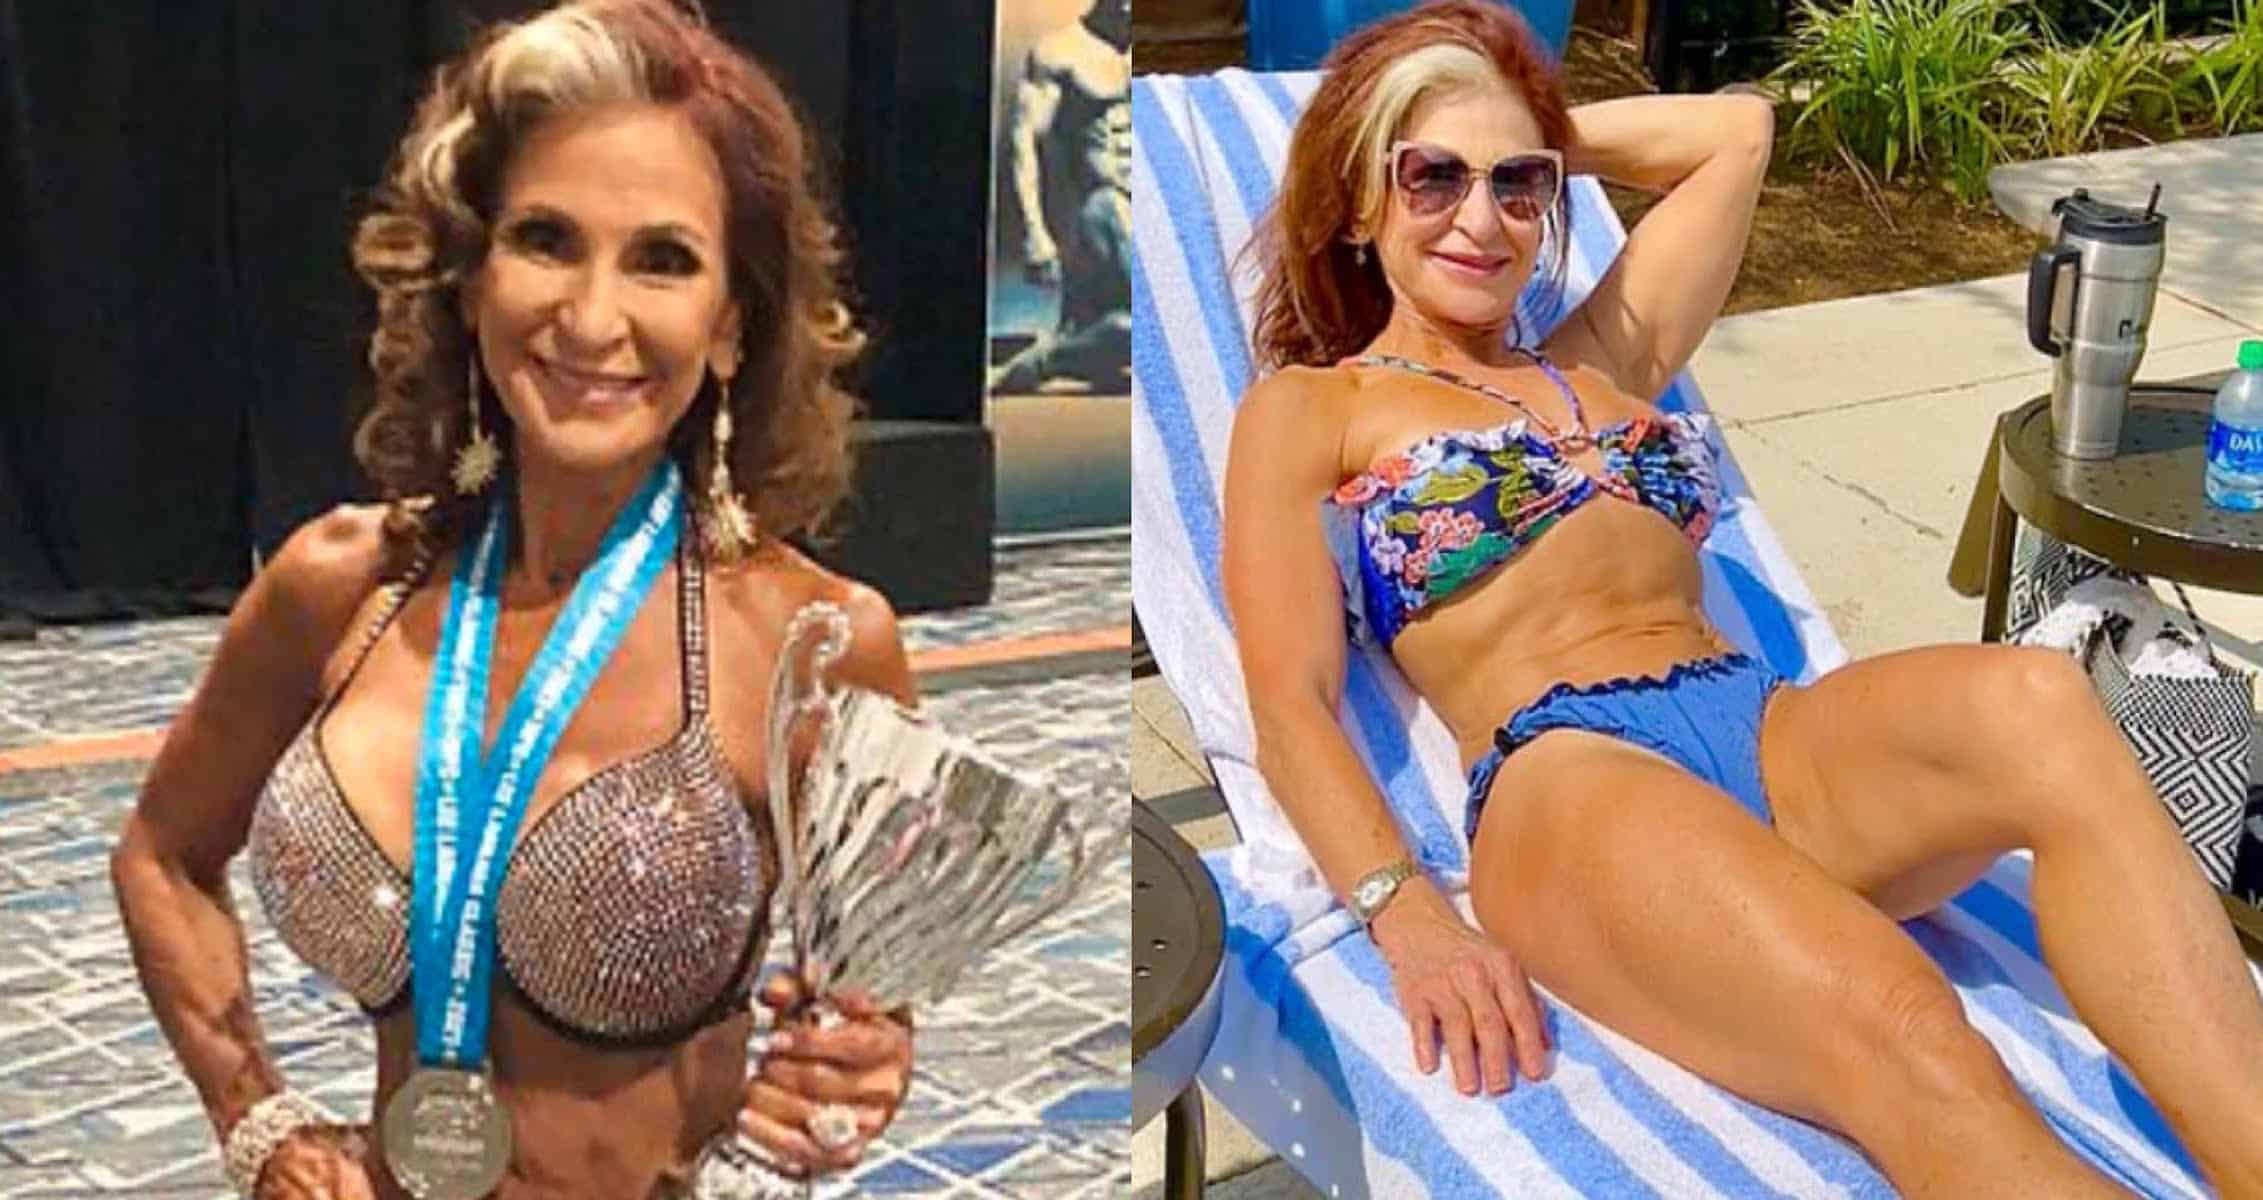 Bodybuilding Grandmother Begins Competing At 69 Years Old, Feels Better  Than In Her 20s